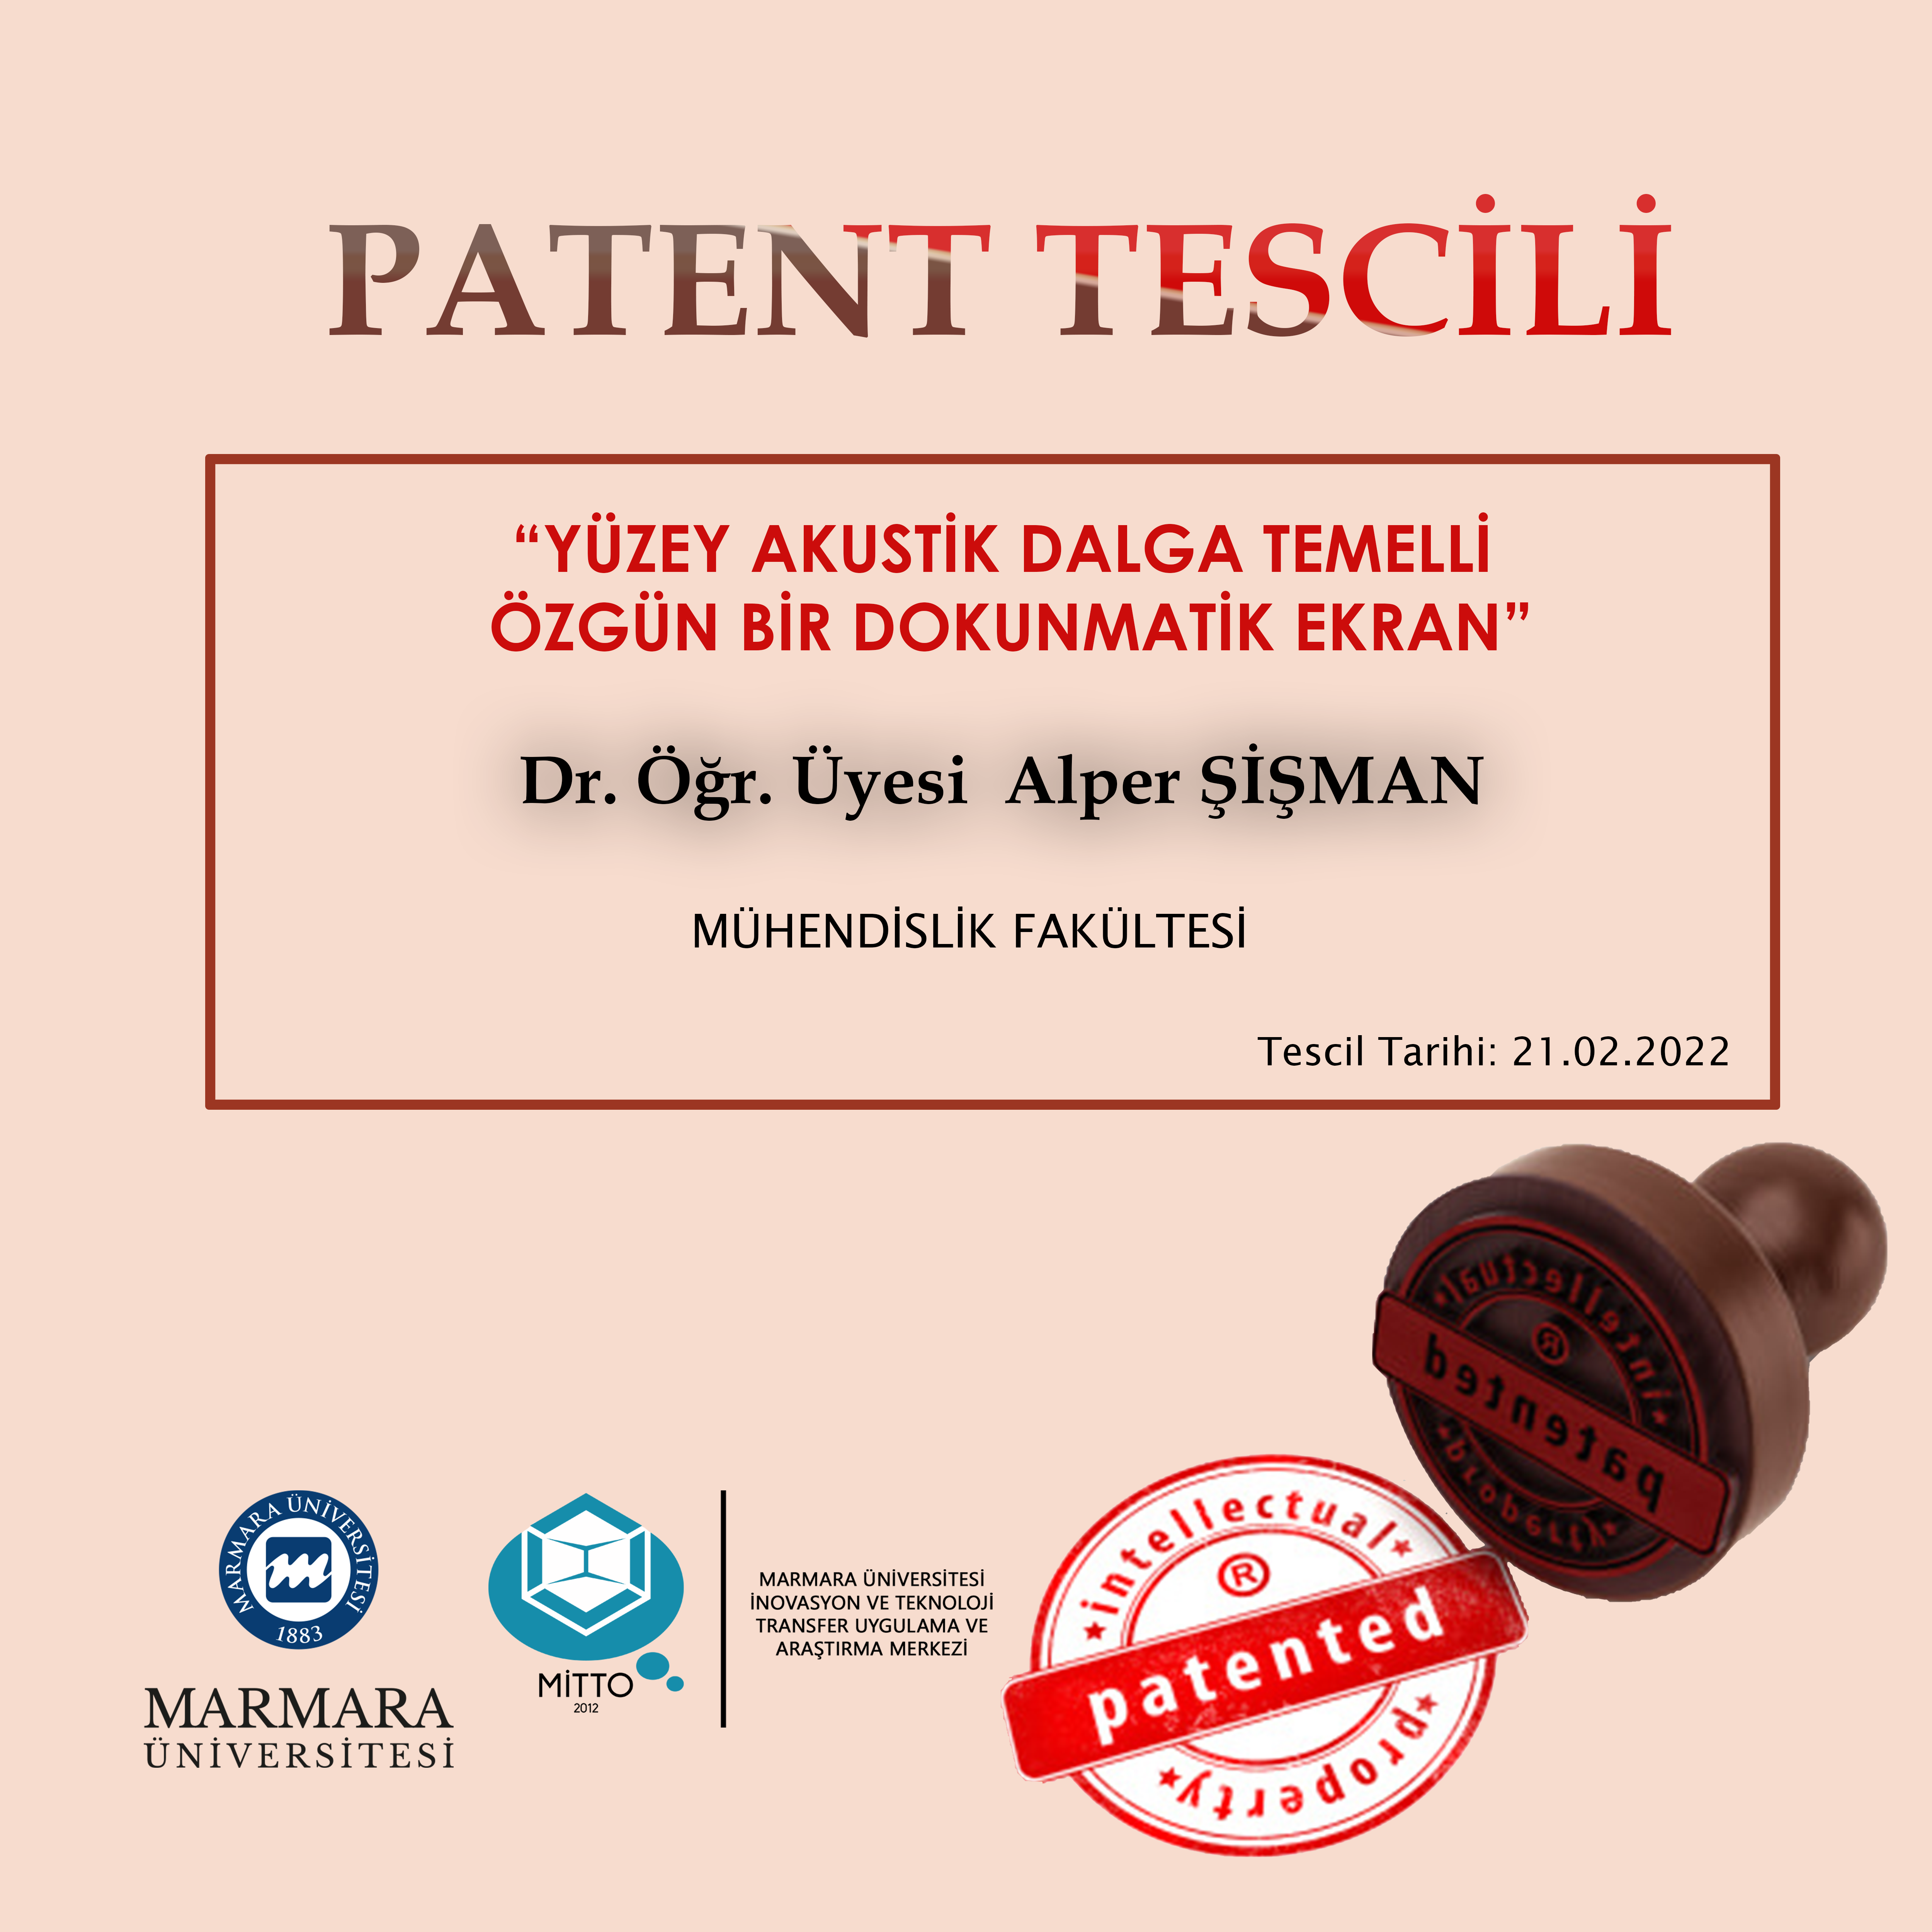 Patent 2.png (2.66 MB)